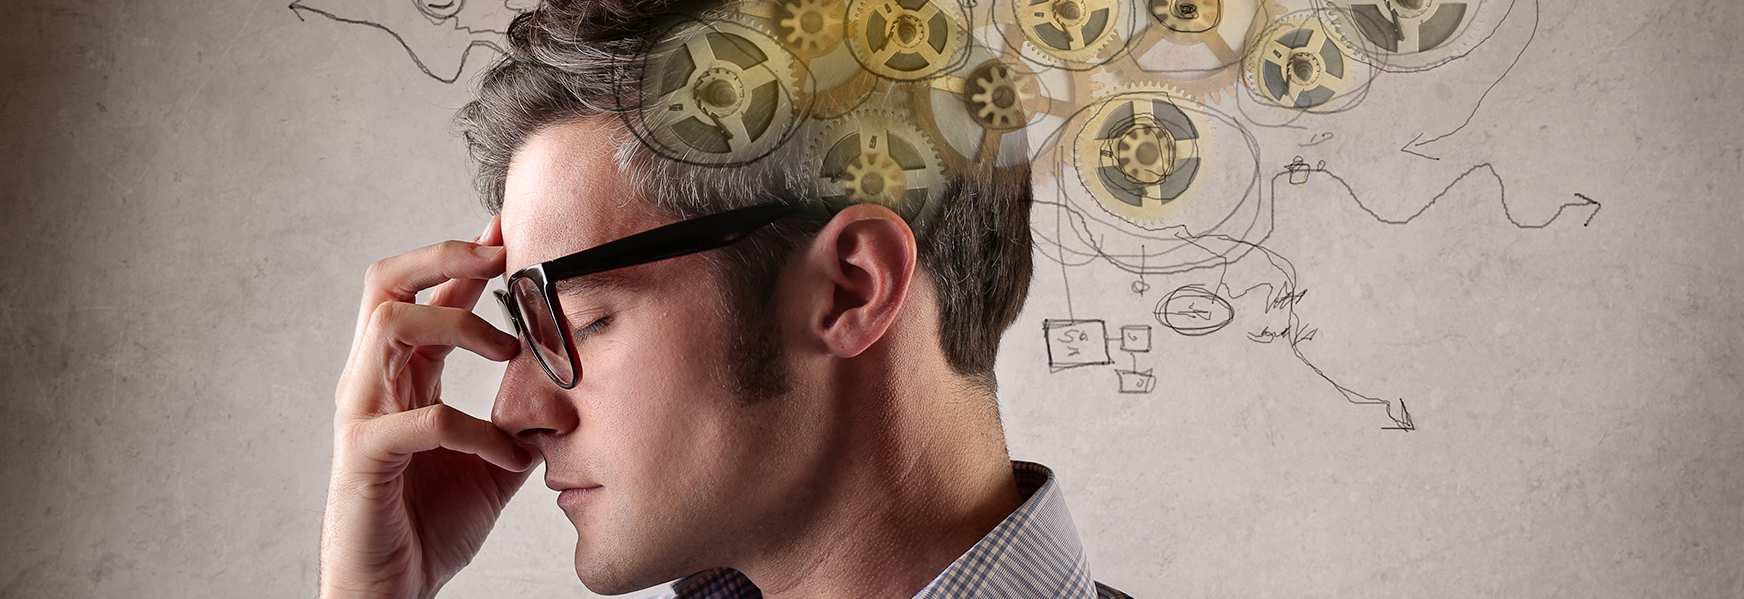 Man thinking with cogs and scribbled notes surrounding head